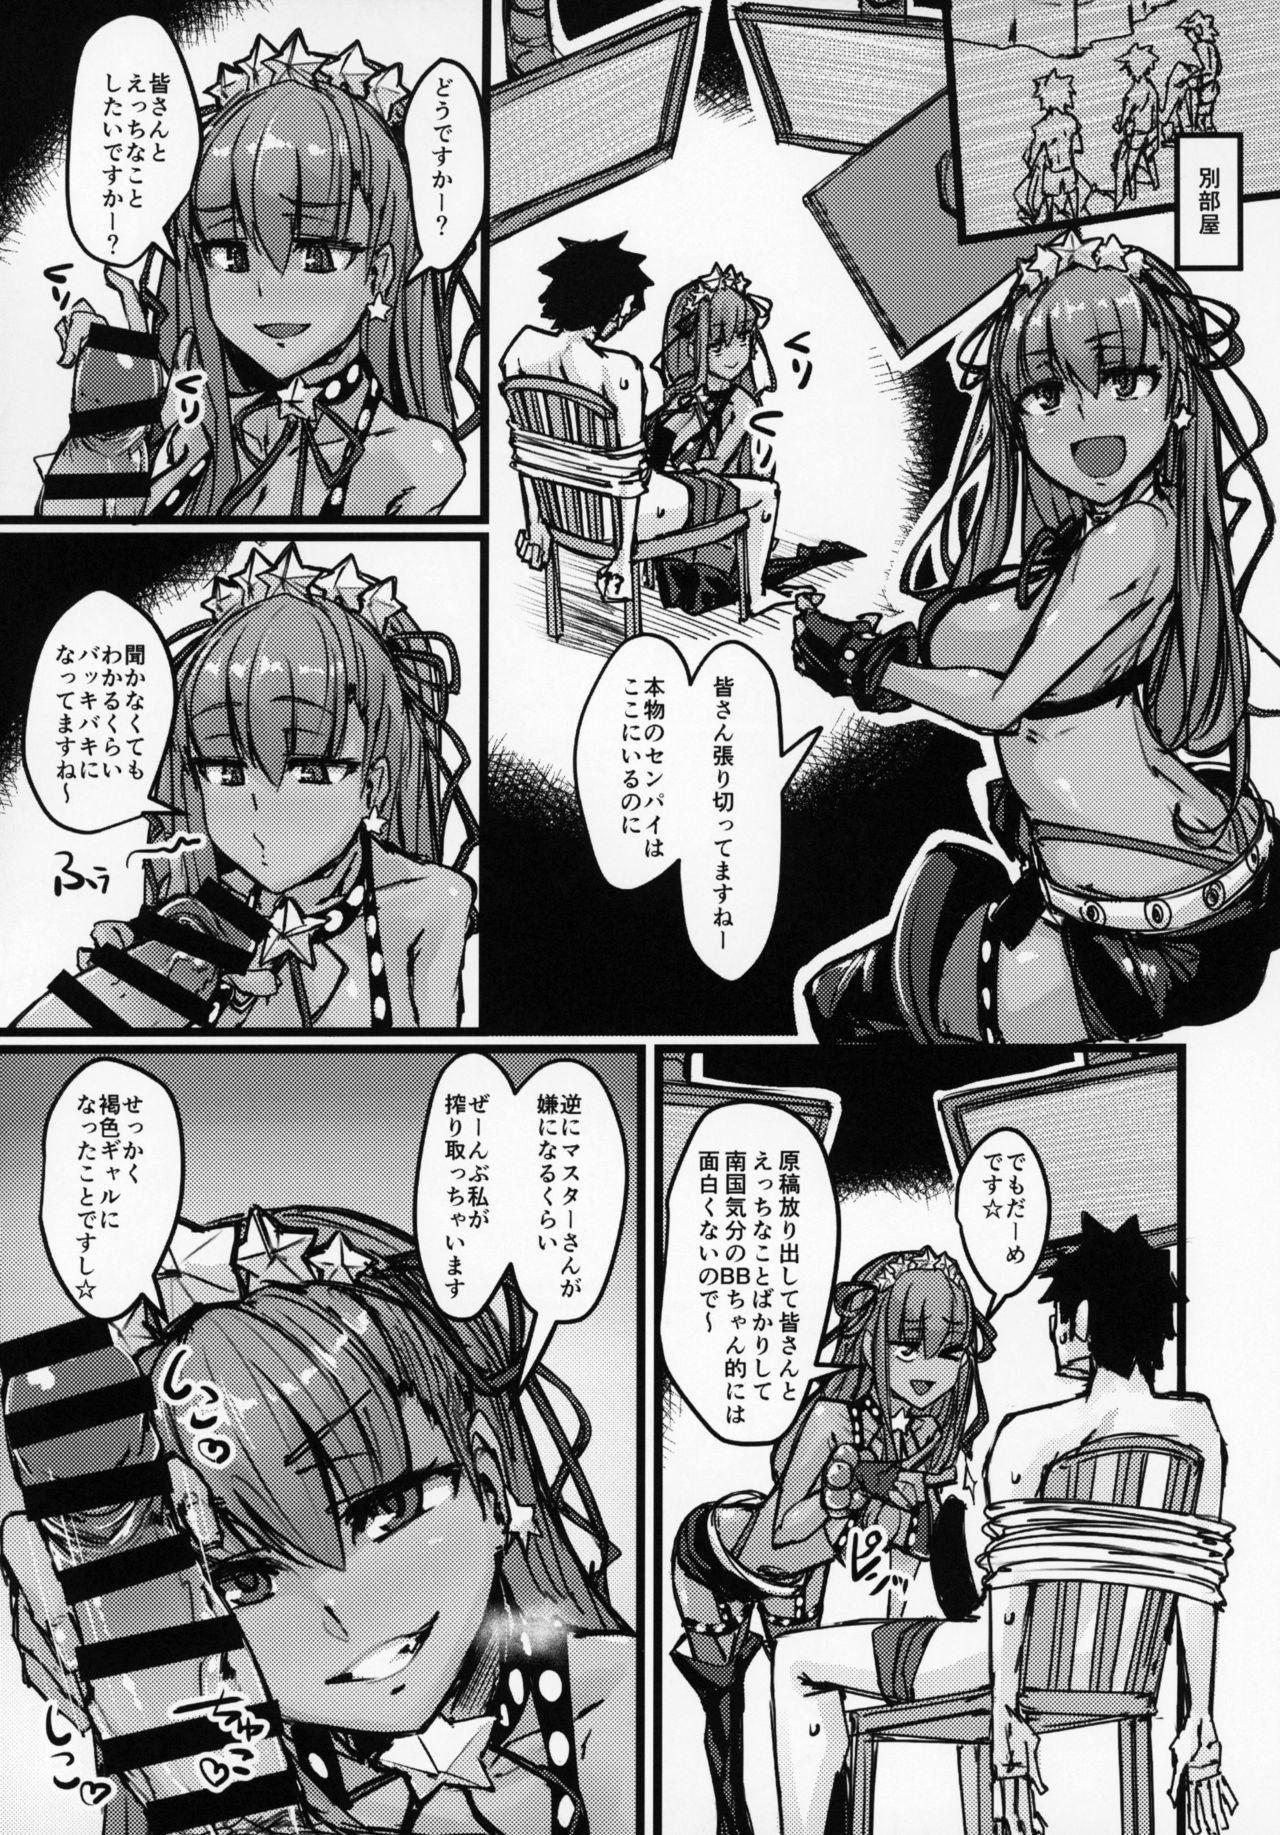 Gostosa AssAssIN+M - Fate grand order Pussy Eating - Page 10